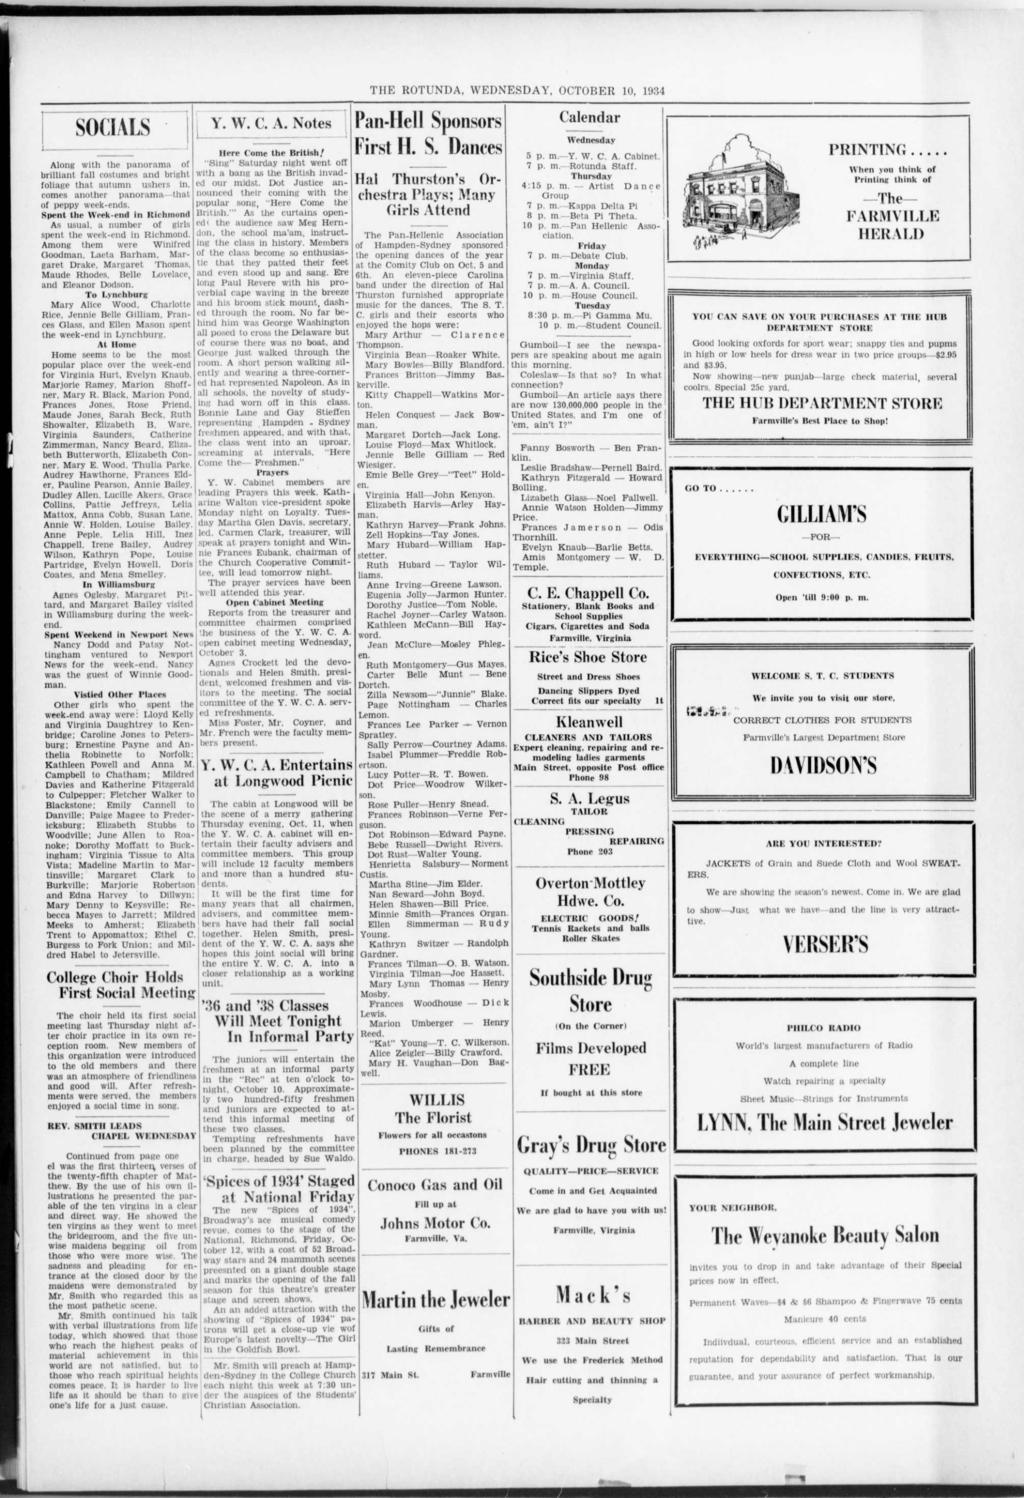 : THE ROTUNDA, WEDNESDAY, OCTOBER 10, 1934 Along wth the panorama of brllant fall costumes and blght folage tha autumn ushers n. comea another panorama tha of peppy week-ends.